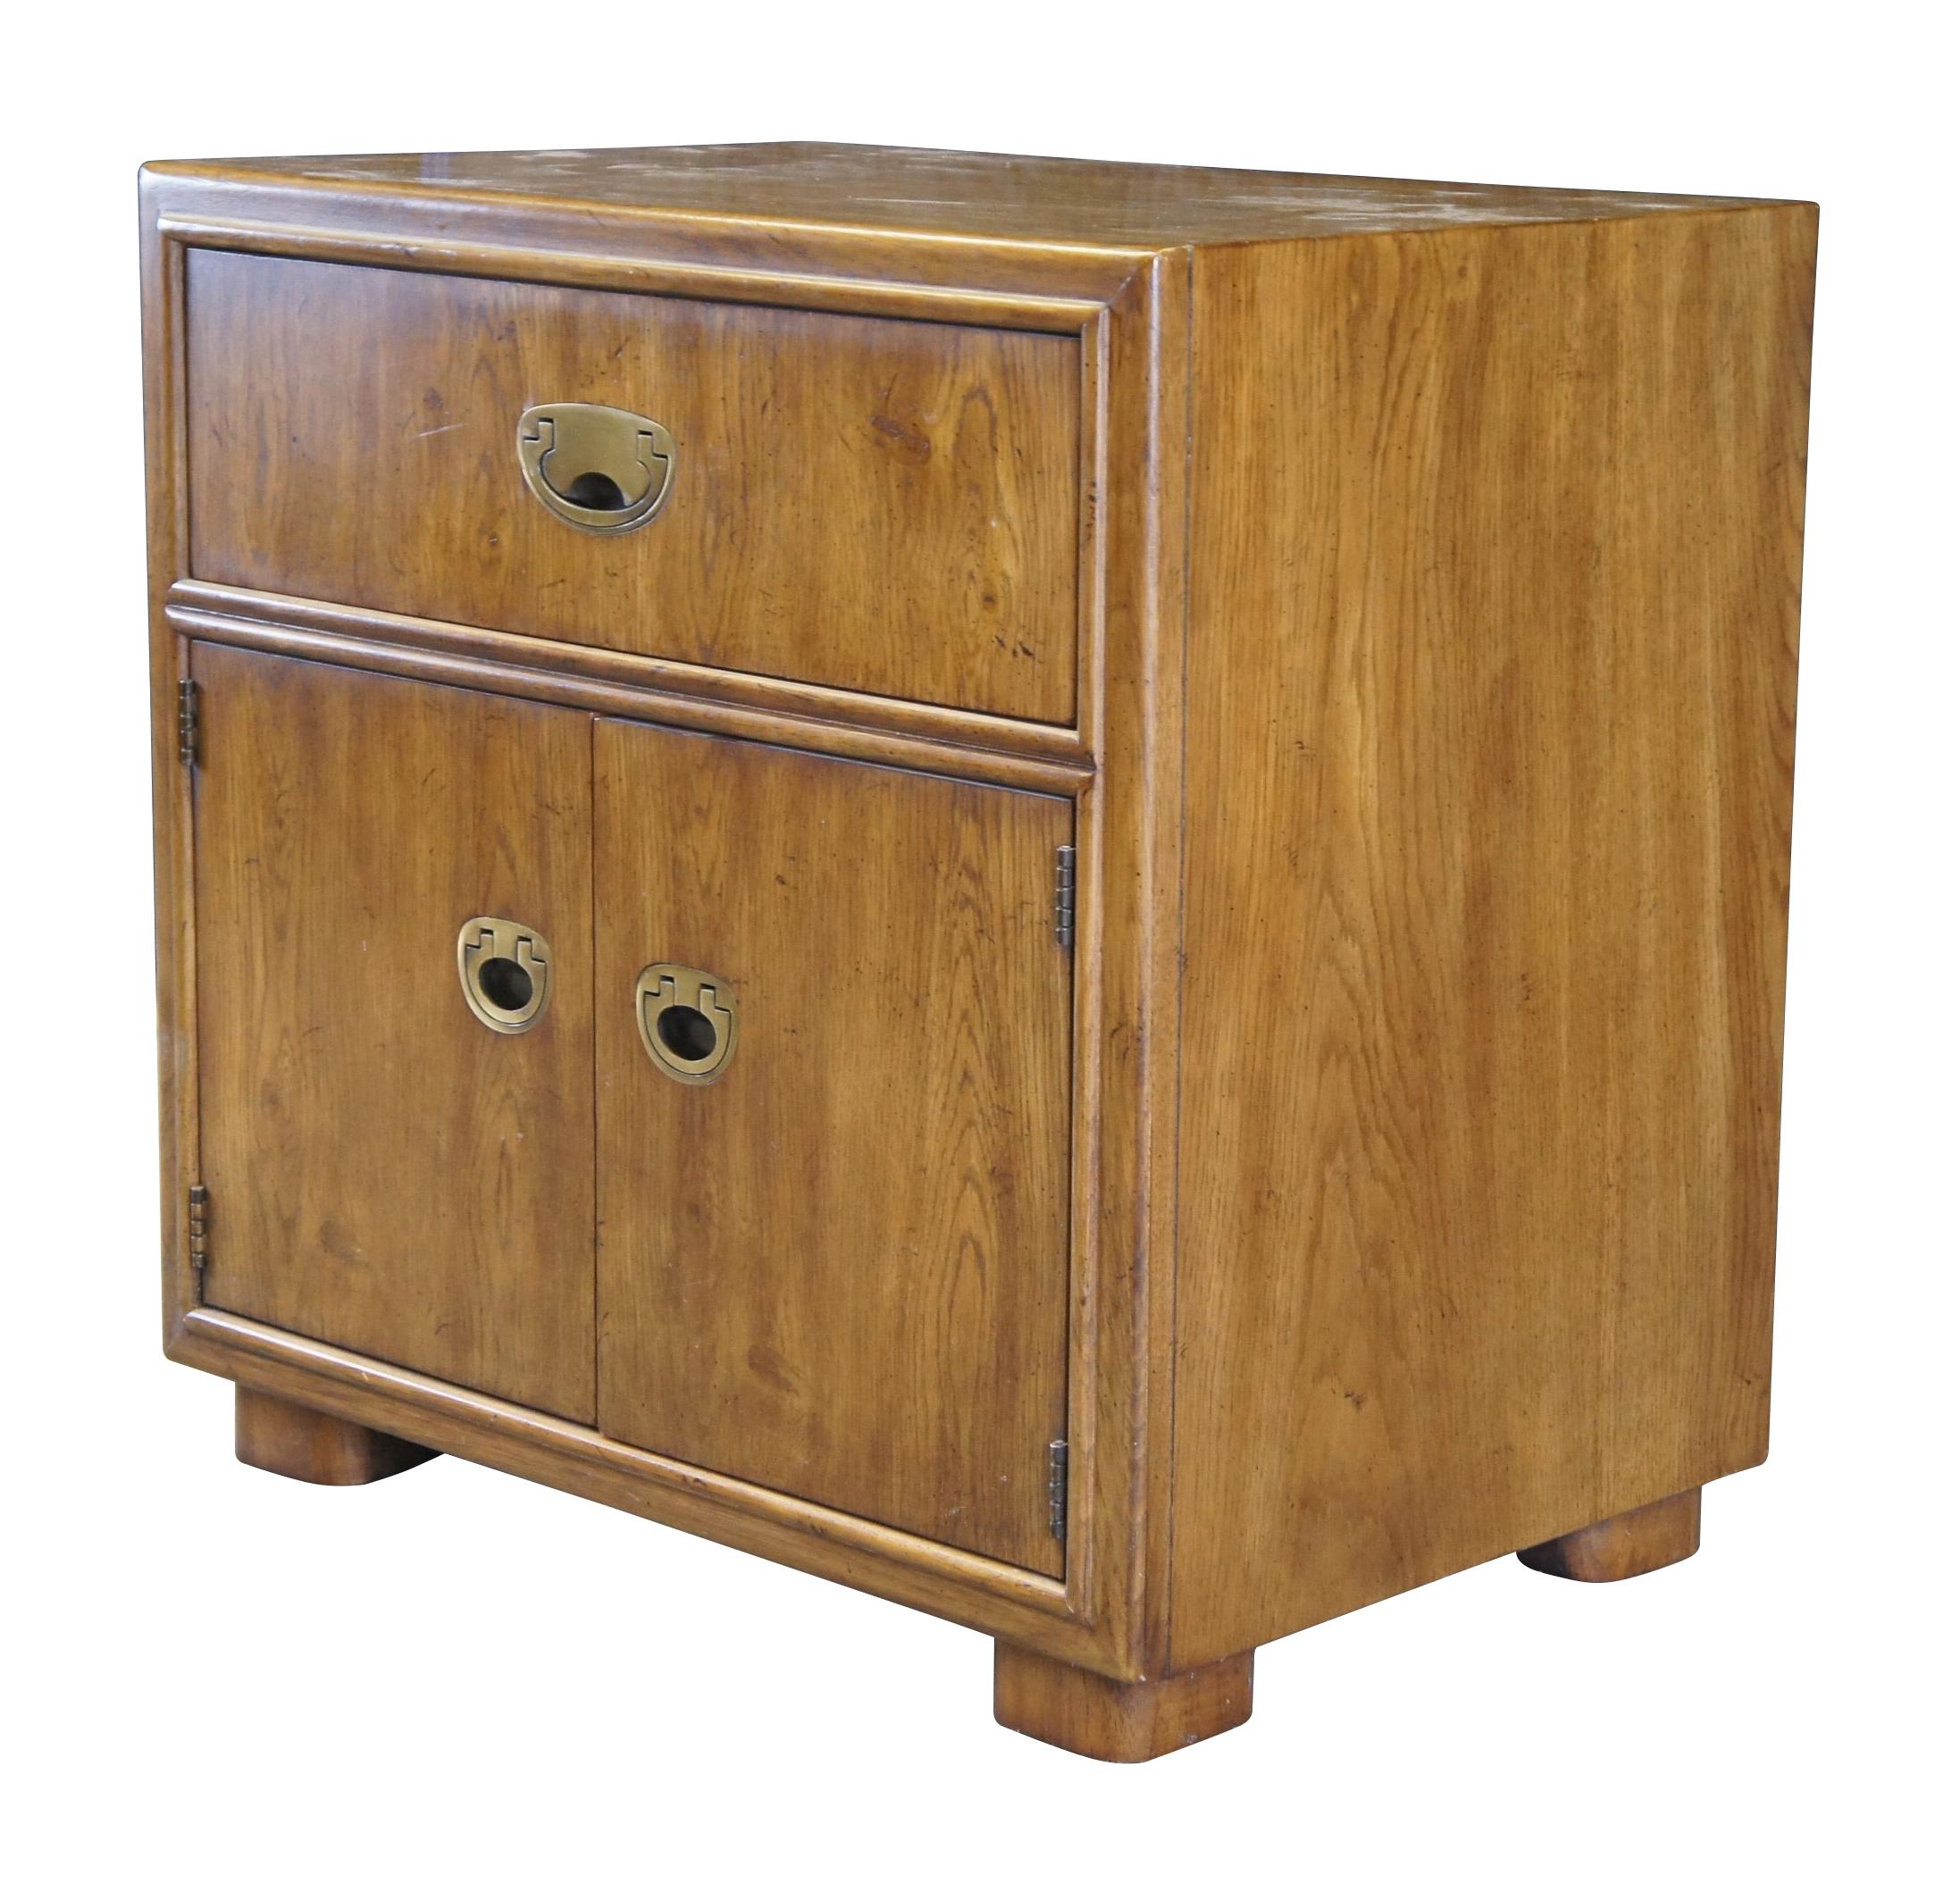 Drexel Heritage Passage Collection nightstand or end table, circa 1987, no 915-630-2.  Features a rectangular frame made from oak with a dovetailed drawer over lower cabinet with inset brass drawer pulls.  A great addition to any mid century modern